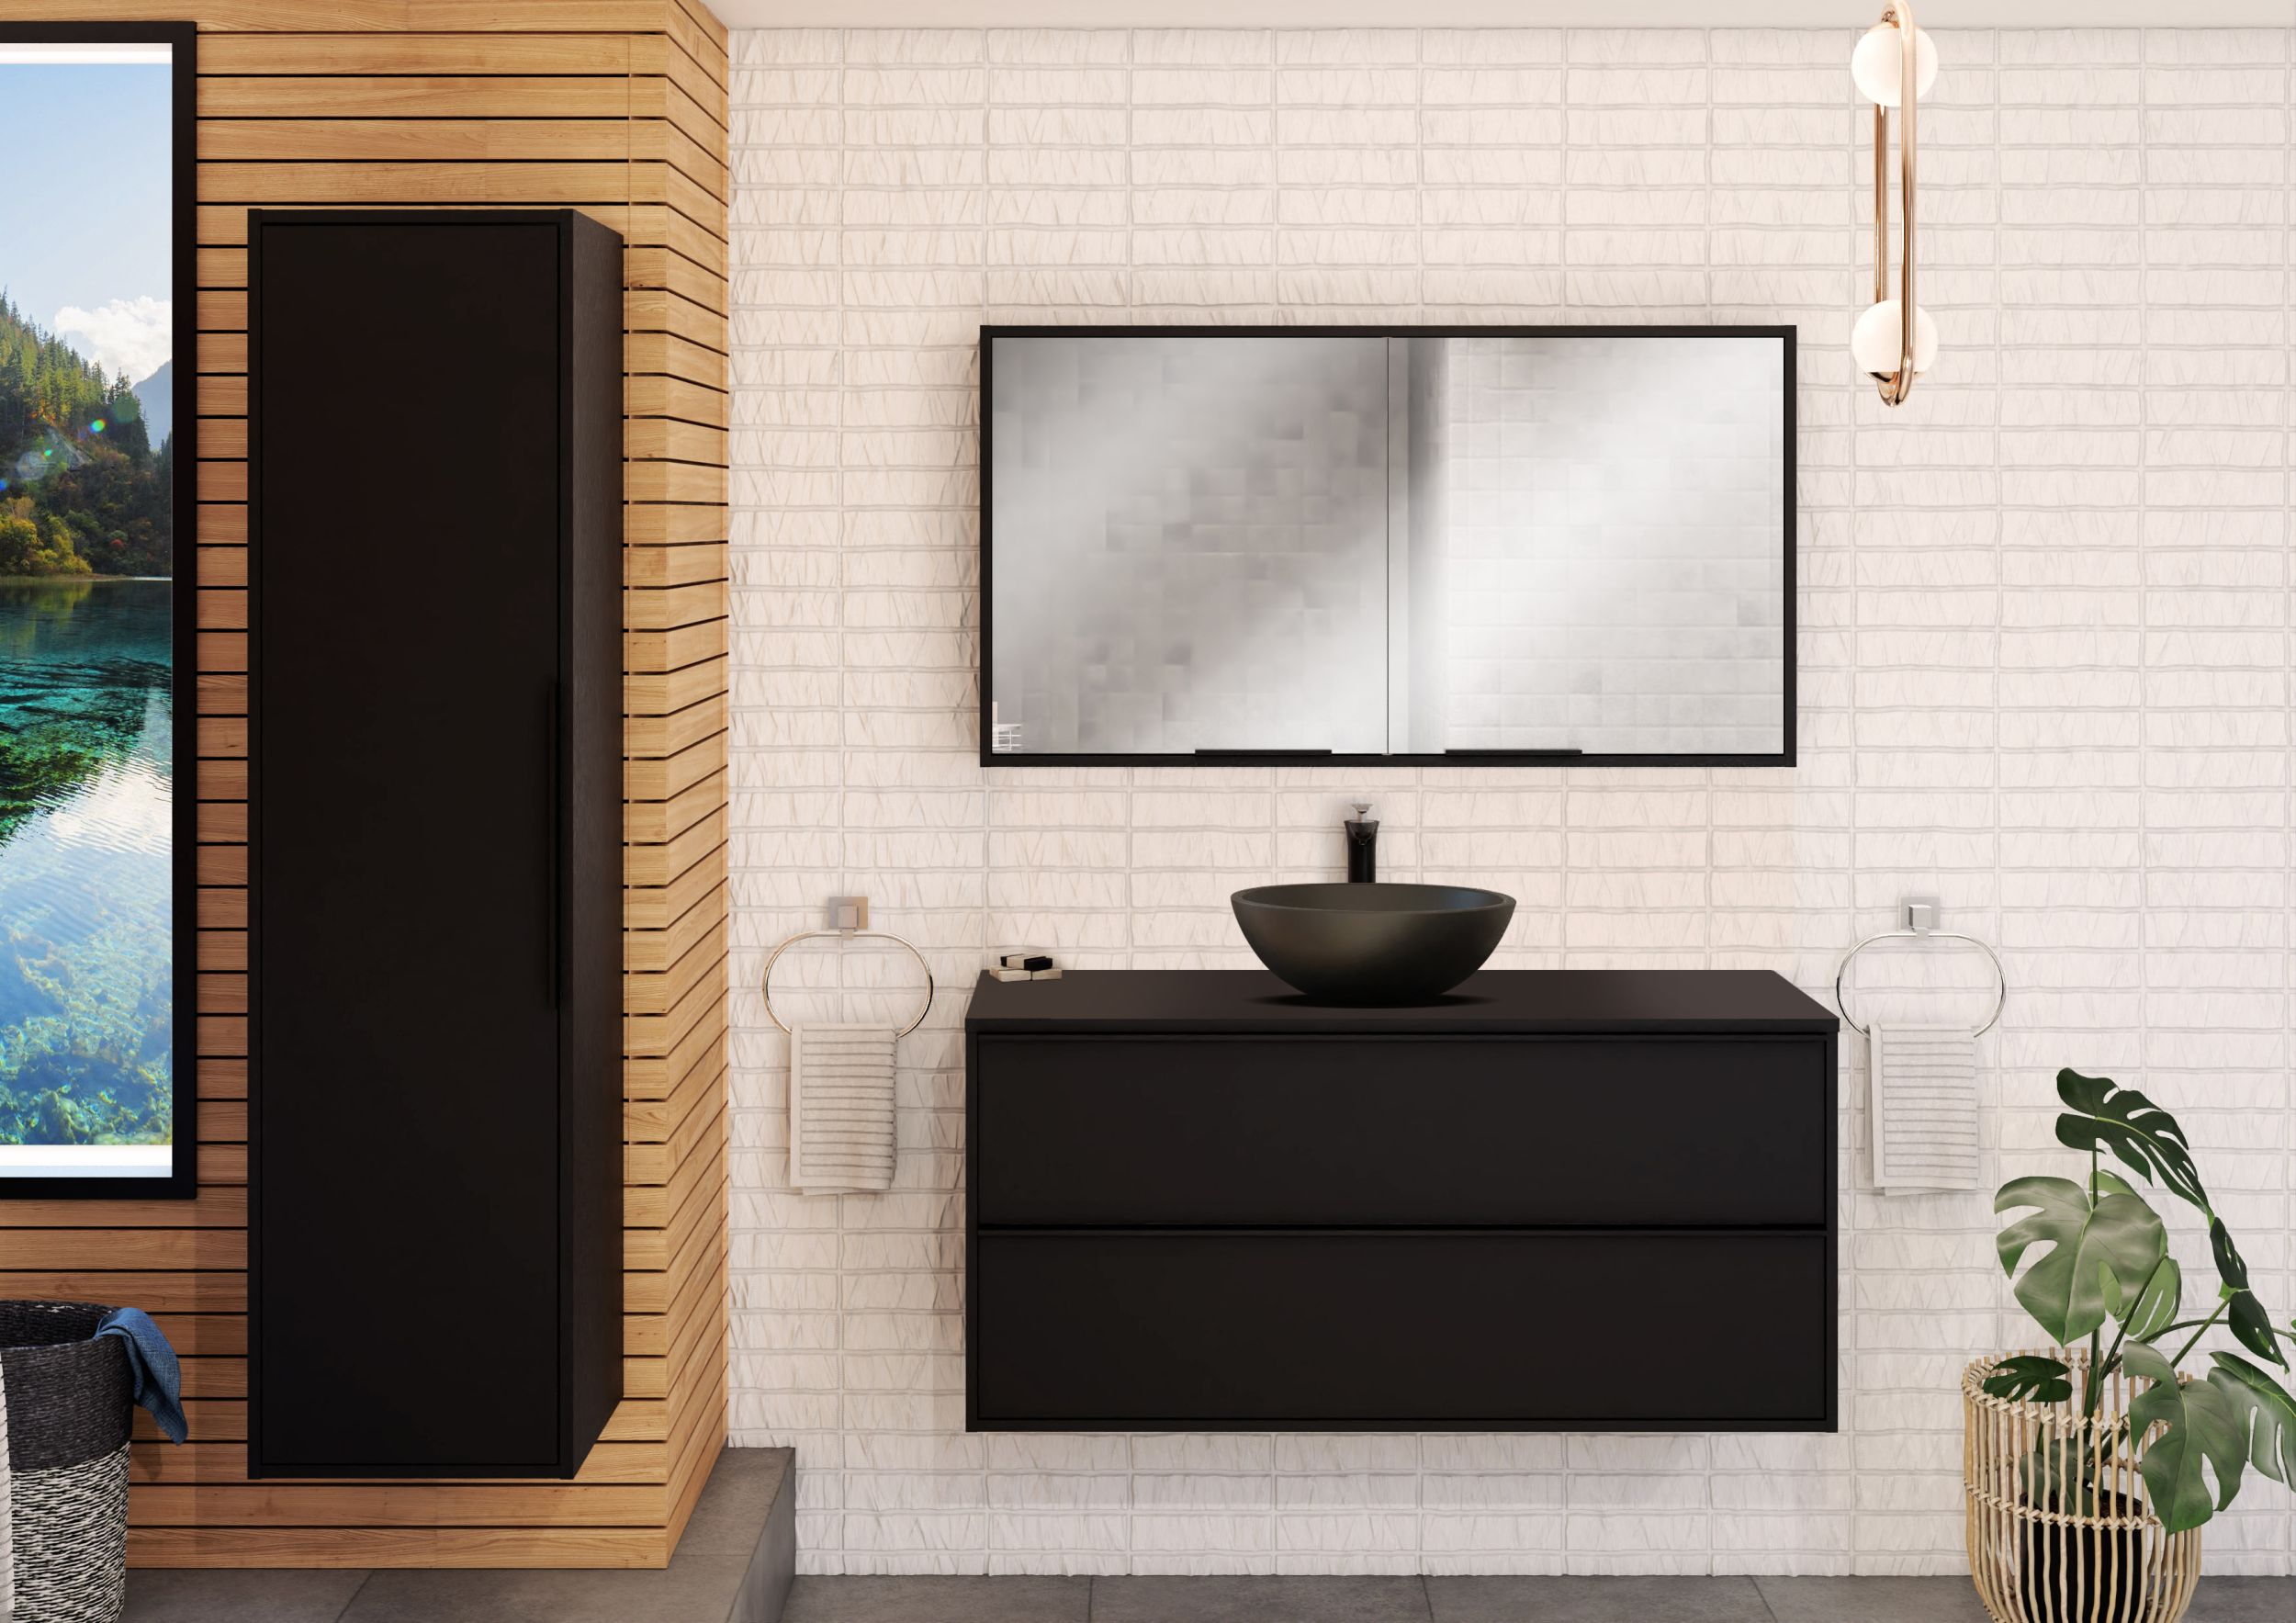  Vanity unit 120 cm with black handles - single centered space for siphon installation